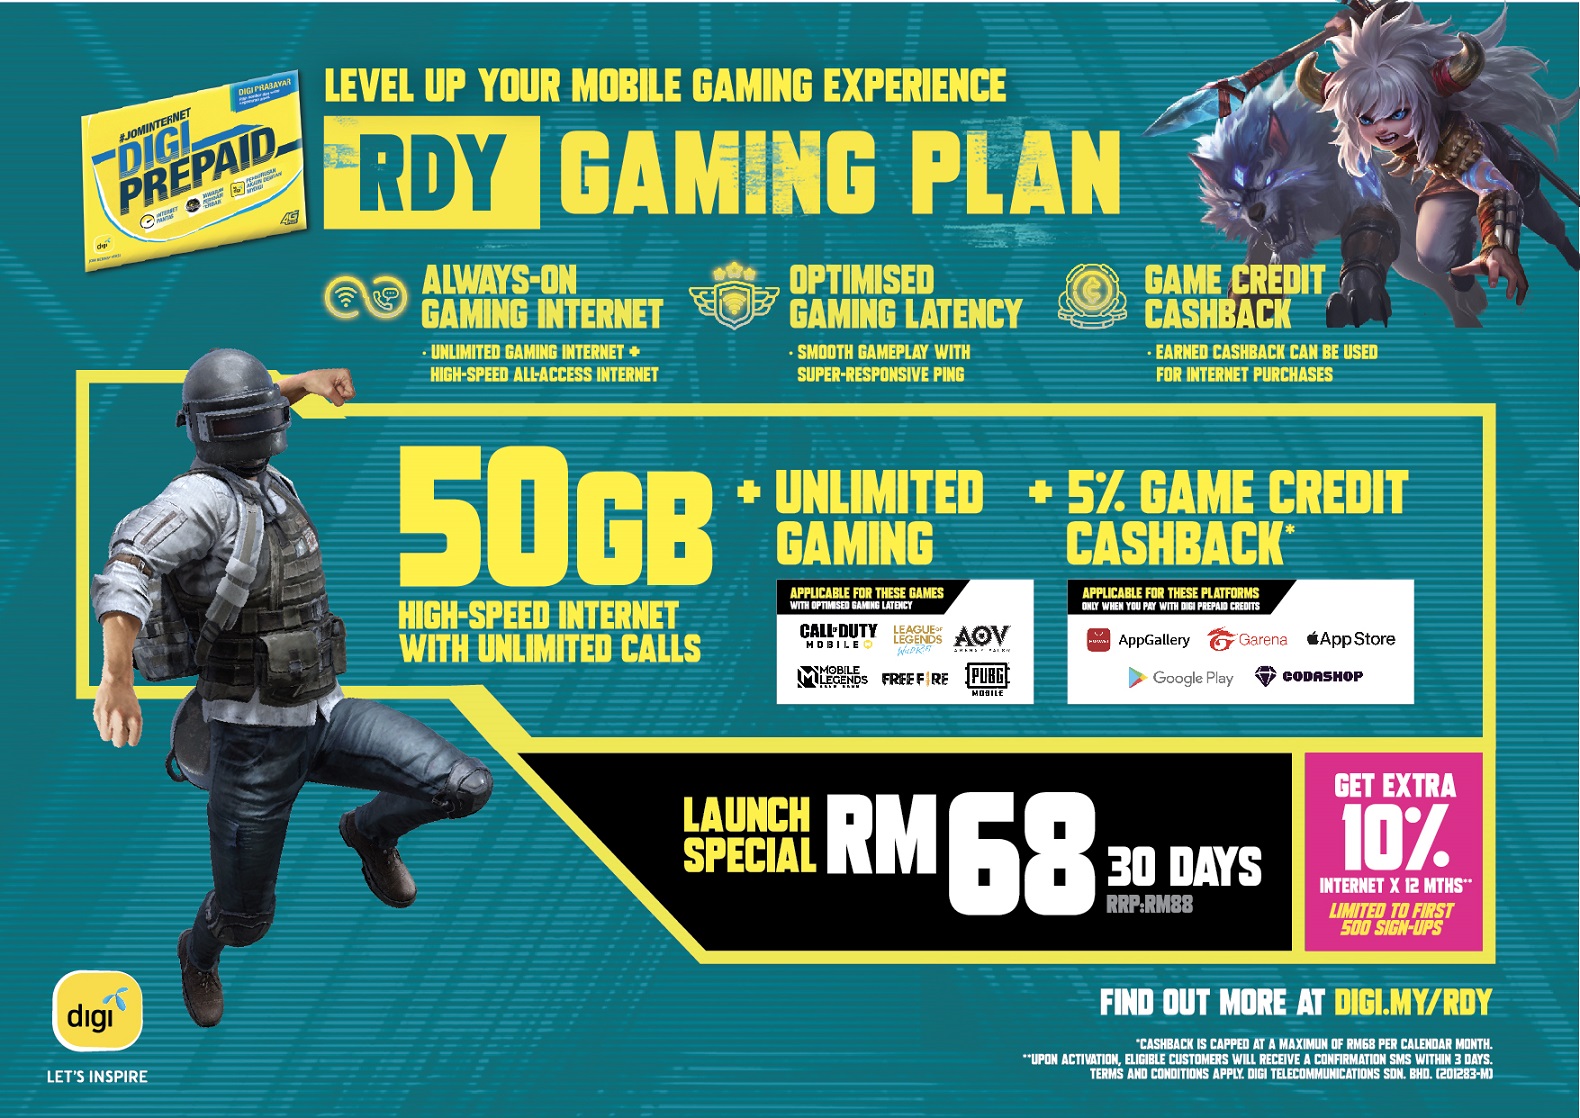 Digi unveils RDY Gaming Plan with 50GB data at RM68/month for a limited time thumbnail